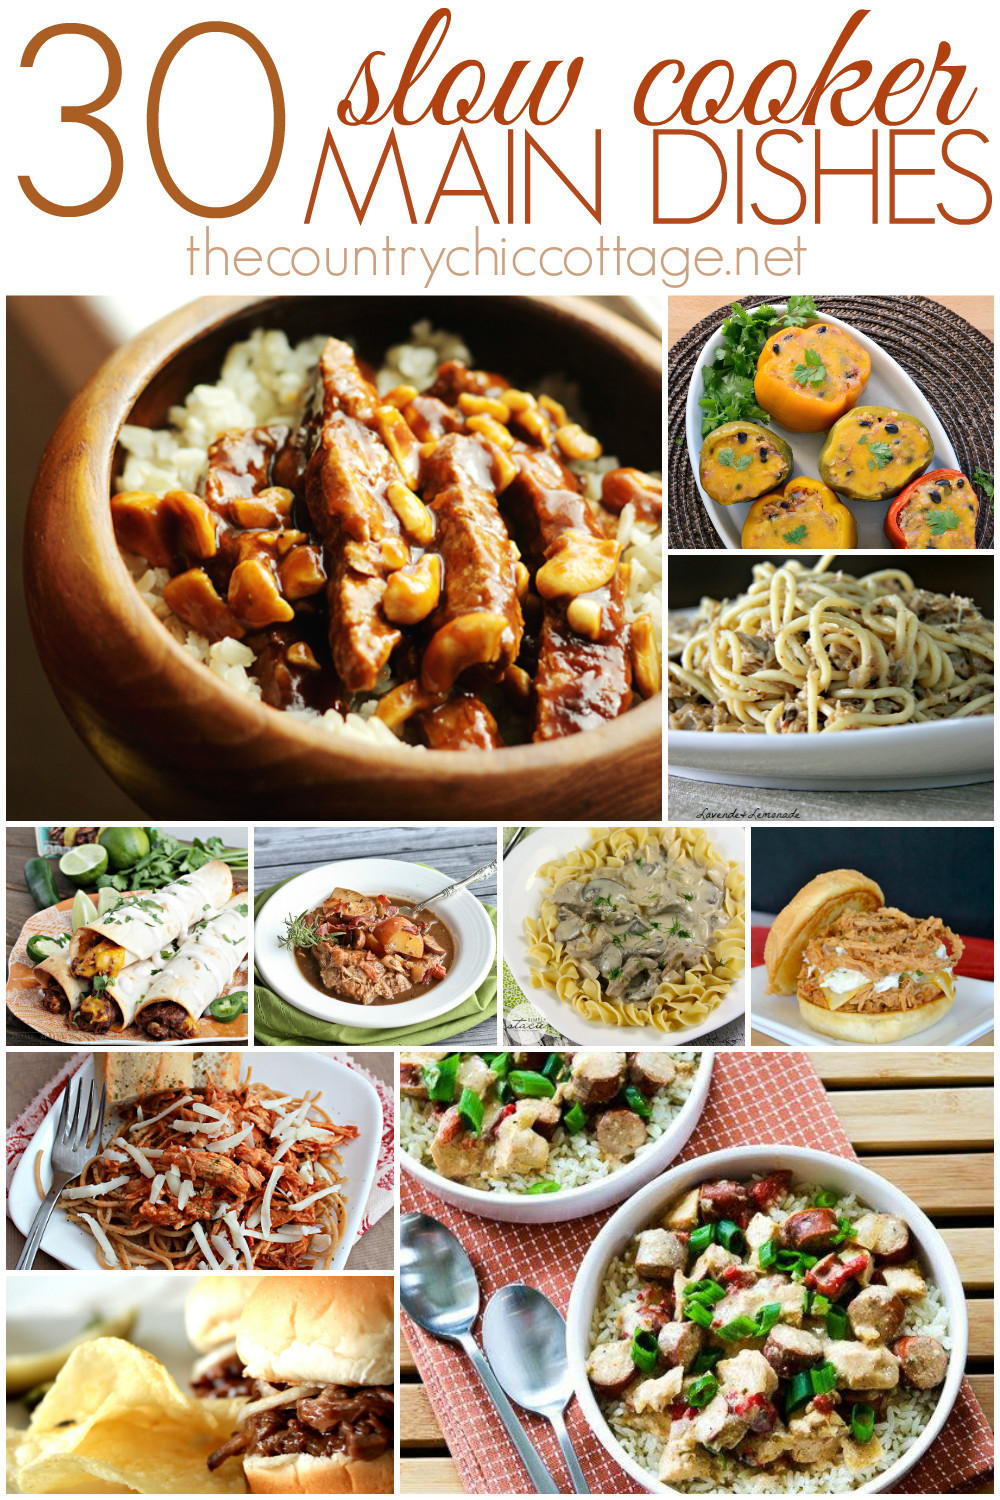 Slow Cooker Main Dishes
 30 Slow Cooker Main Dishes The Country Chic Cottage